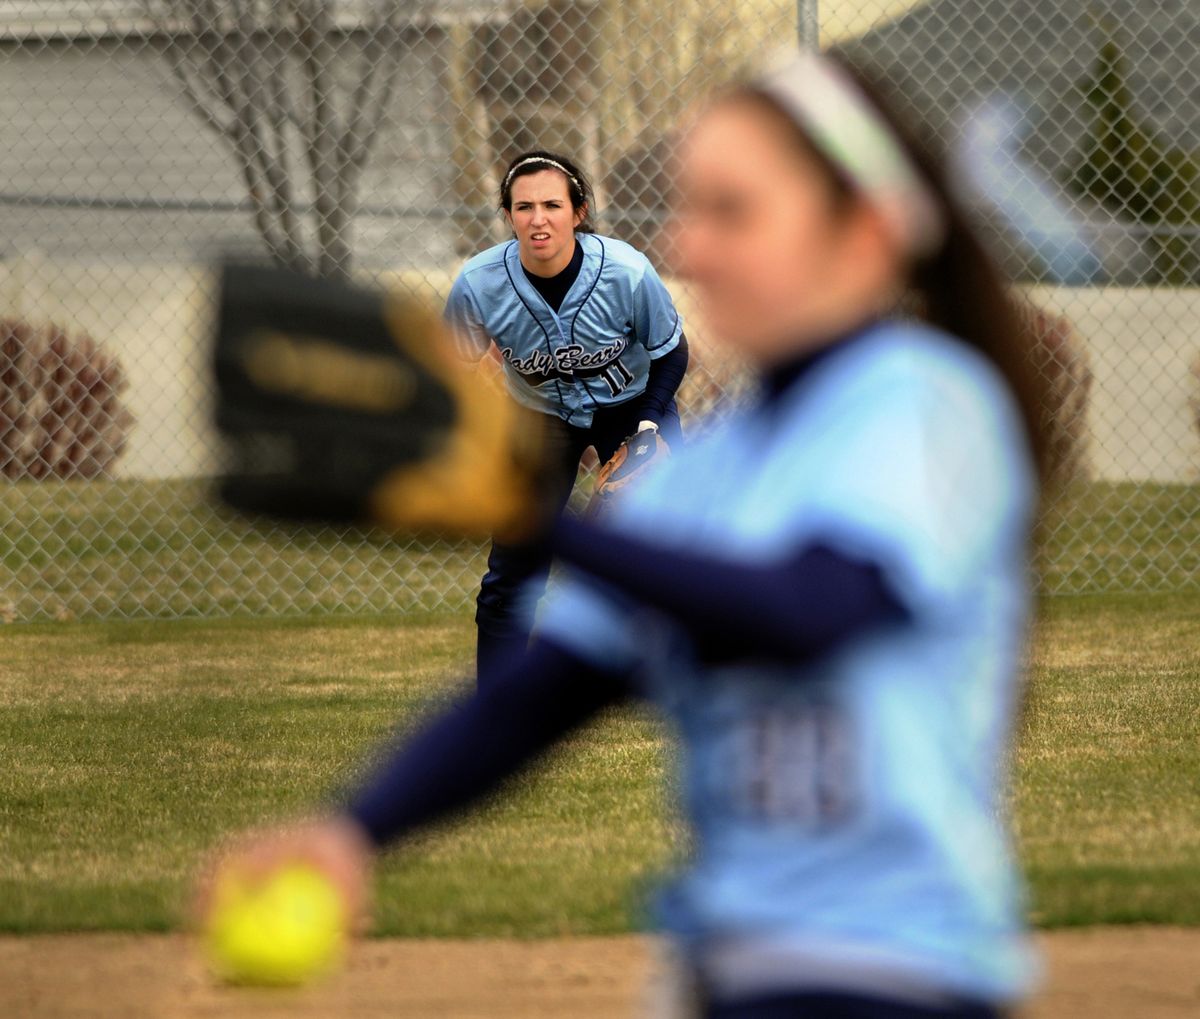 When she’s not pitching, Central Valley senior captain Lindsay Gibson plays left field for the Bears. (PHOTOS BY J. BART RAYNIAK)